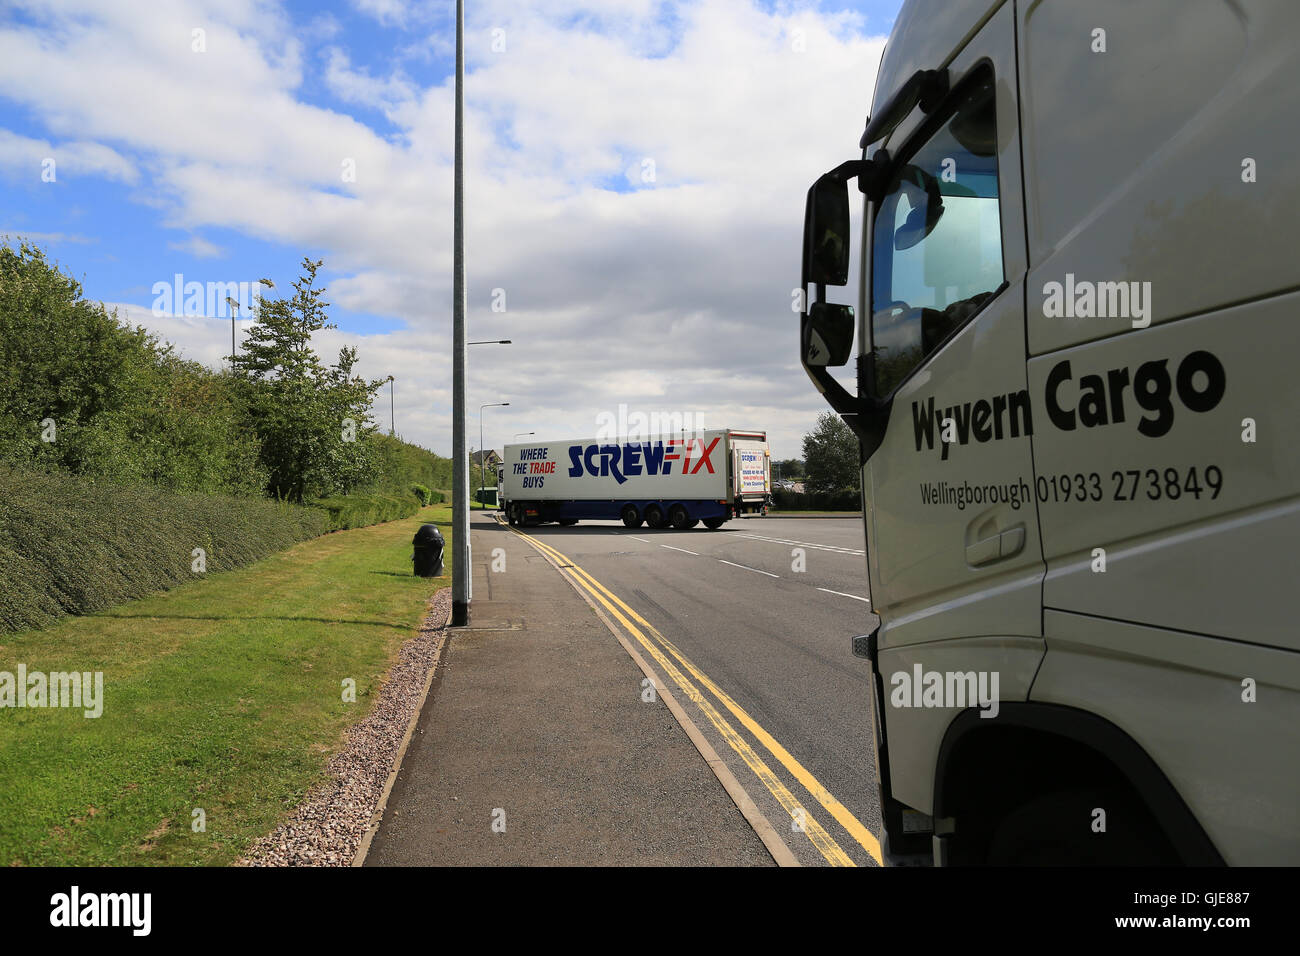 A screwfix lorry turns out onto the road from a depot in the UK Stock Photo